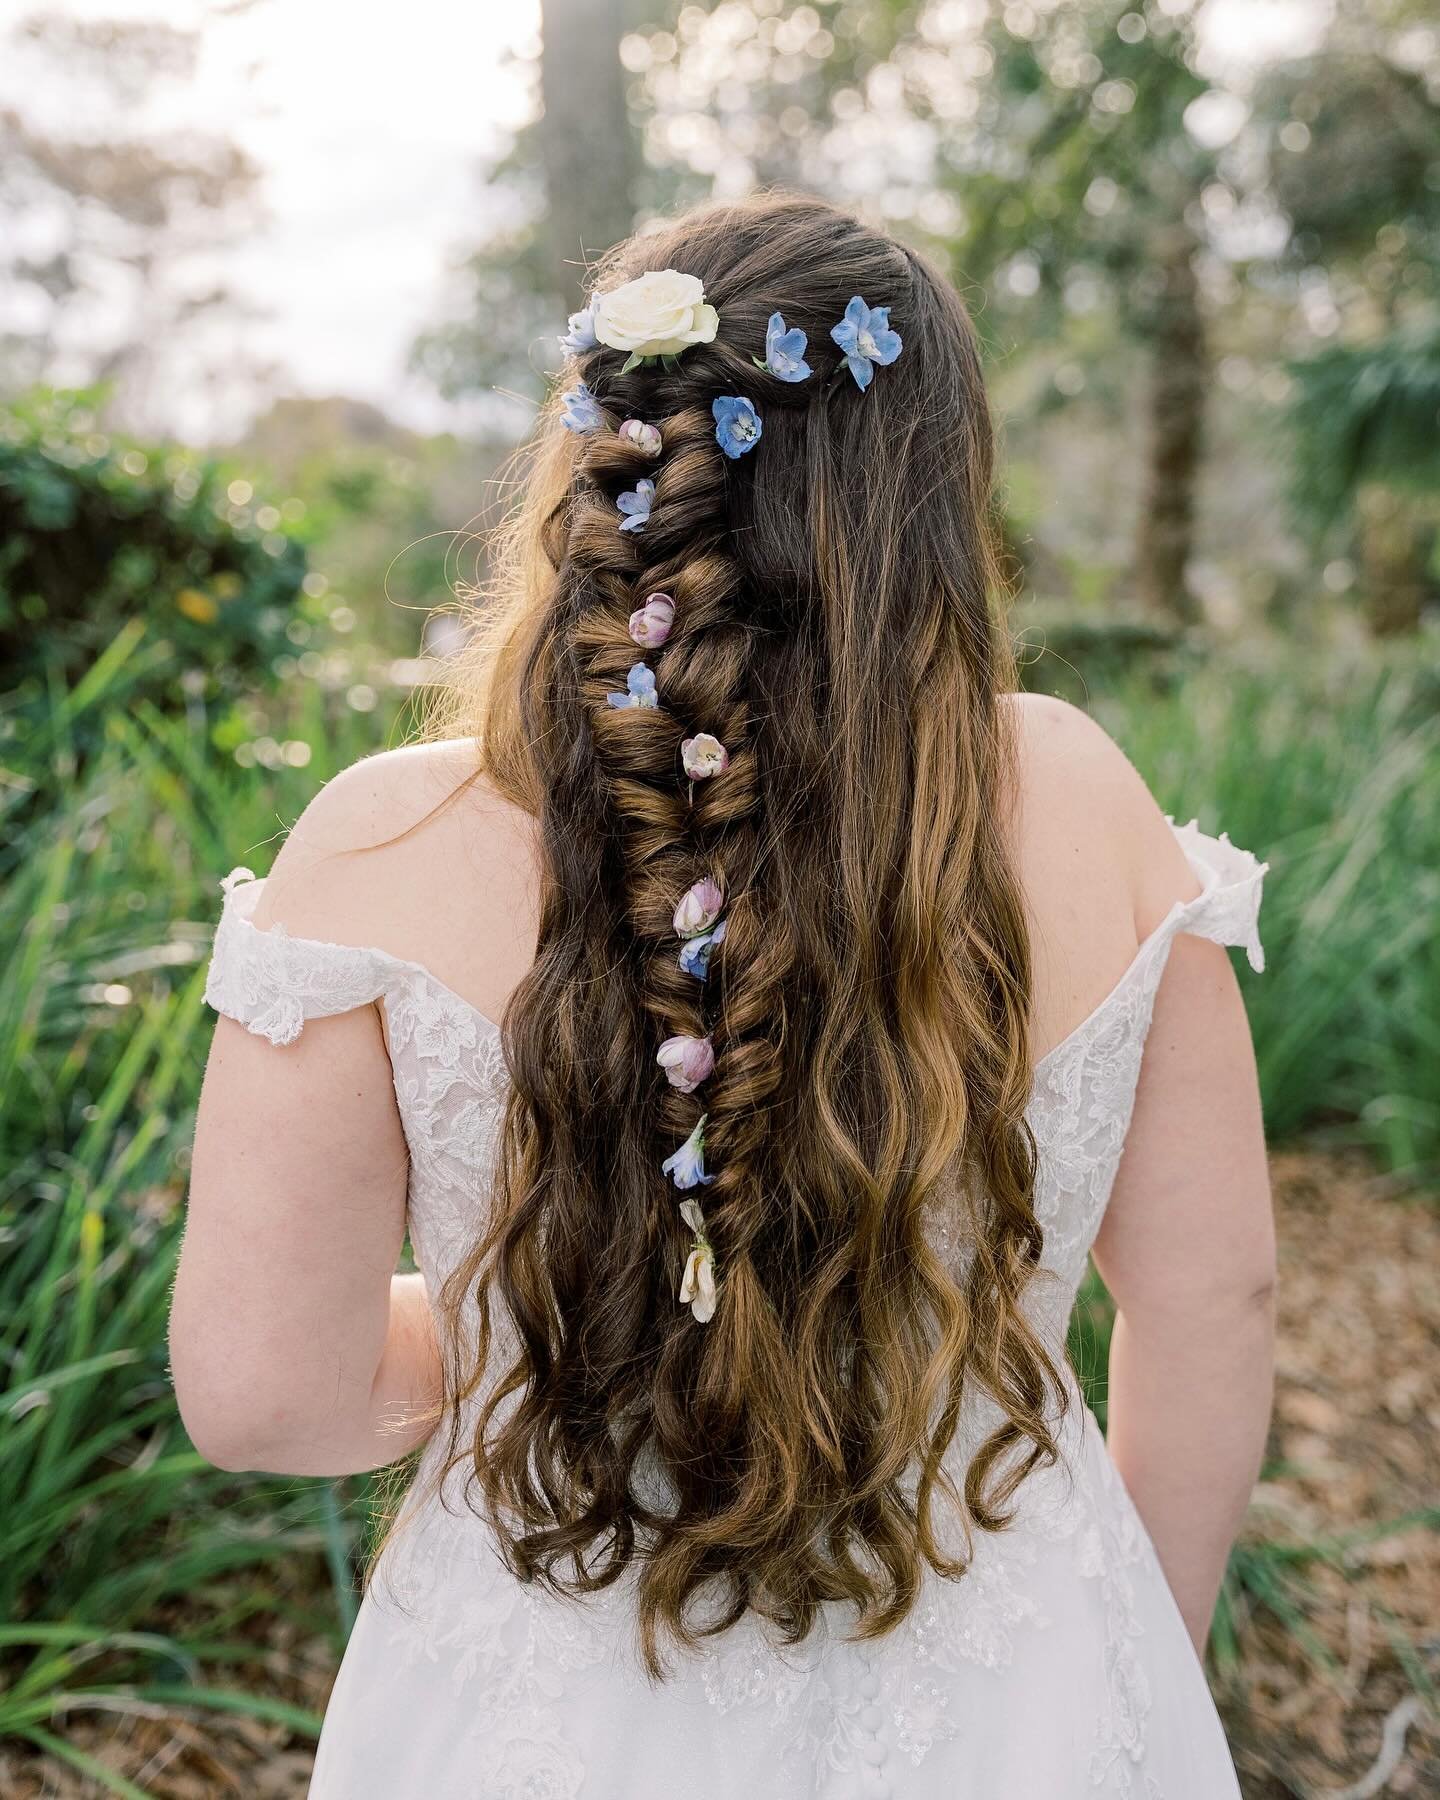 Swipe to watch our girl @beautifiedbybex working her magic to create this insanely gorgeous boho style for Julia on her wedding day! #studiobride 

Photos by @oliviamorganphoto ❤️

#weddinghairstyles #weddinghair #bohobride #bohohairstyles #bridalhai